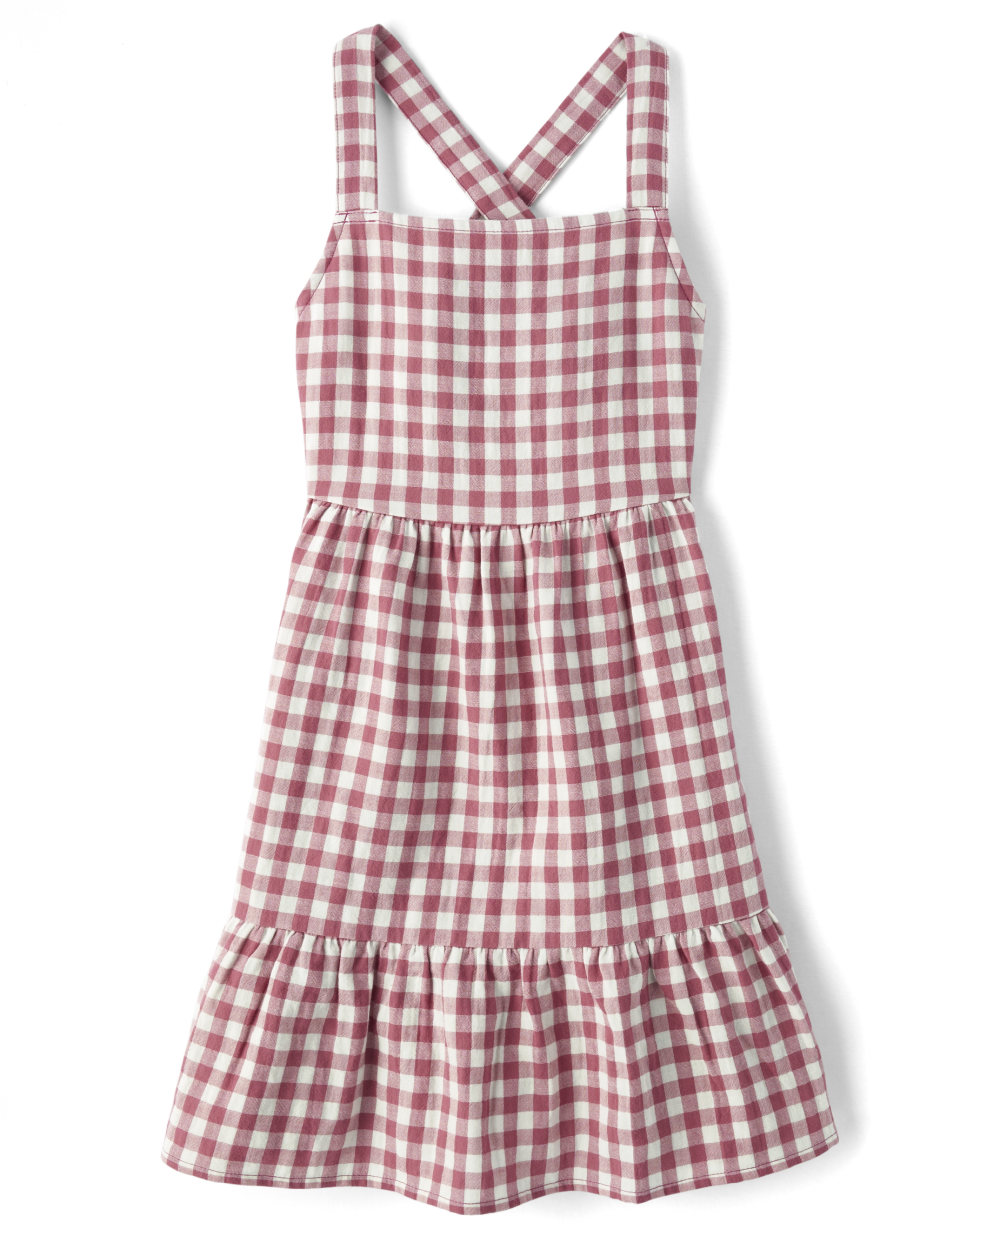 Girls Checkered Gingham Print Square Neck Sleeveless Above the Knee Dress With Ruffles